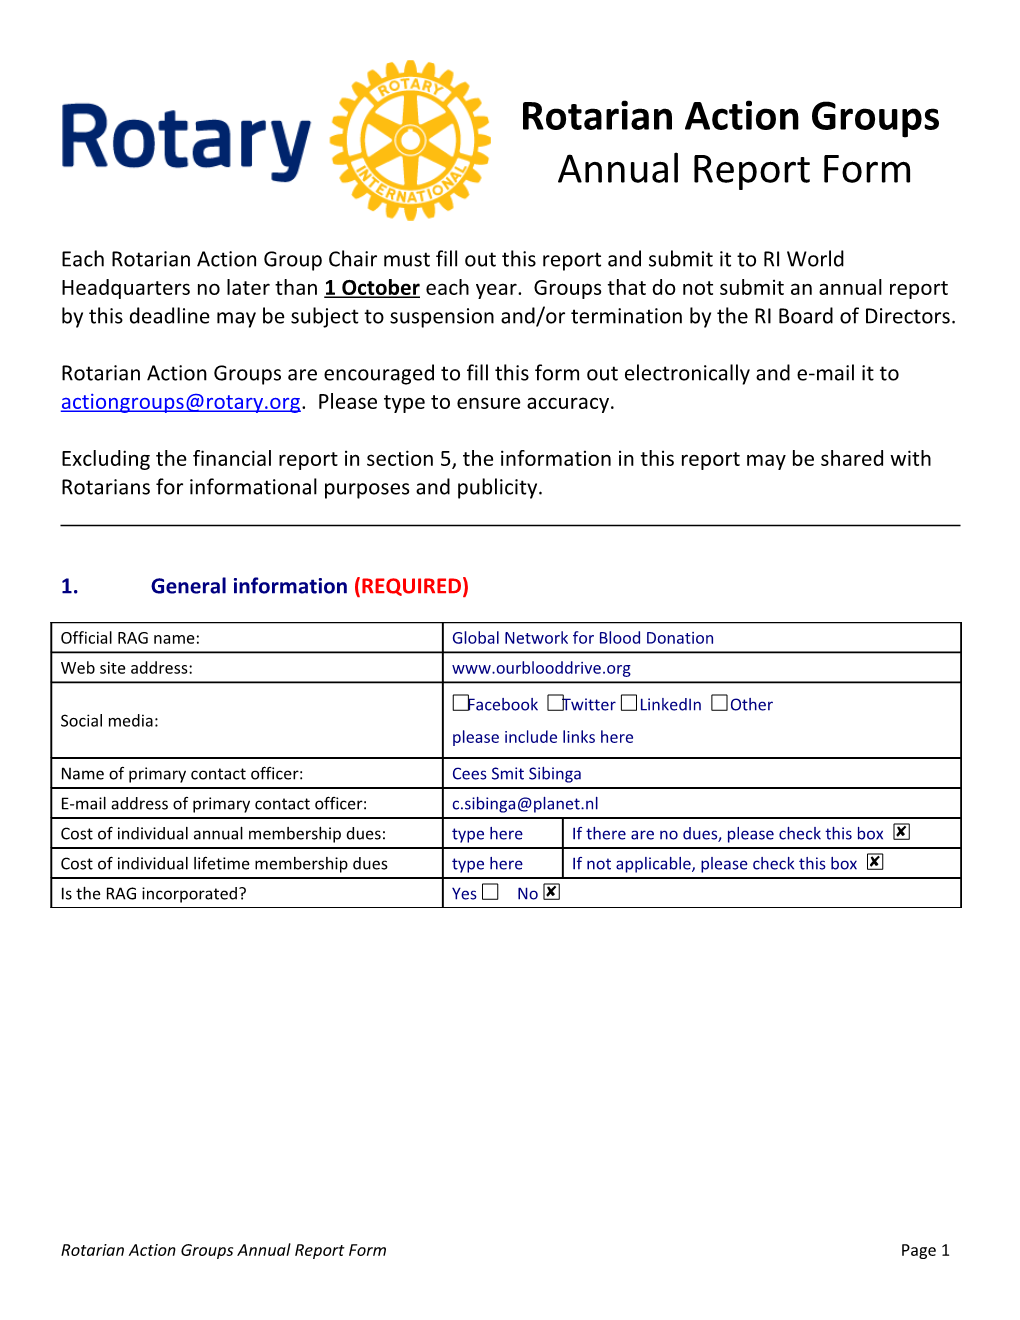 DRAFT Rotary Fellowships Annual Report Form